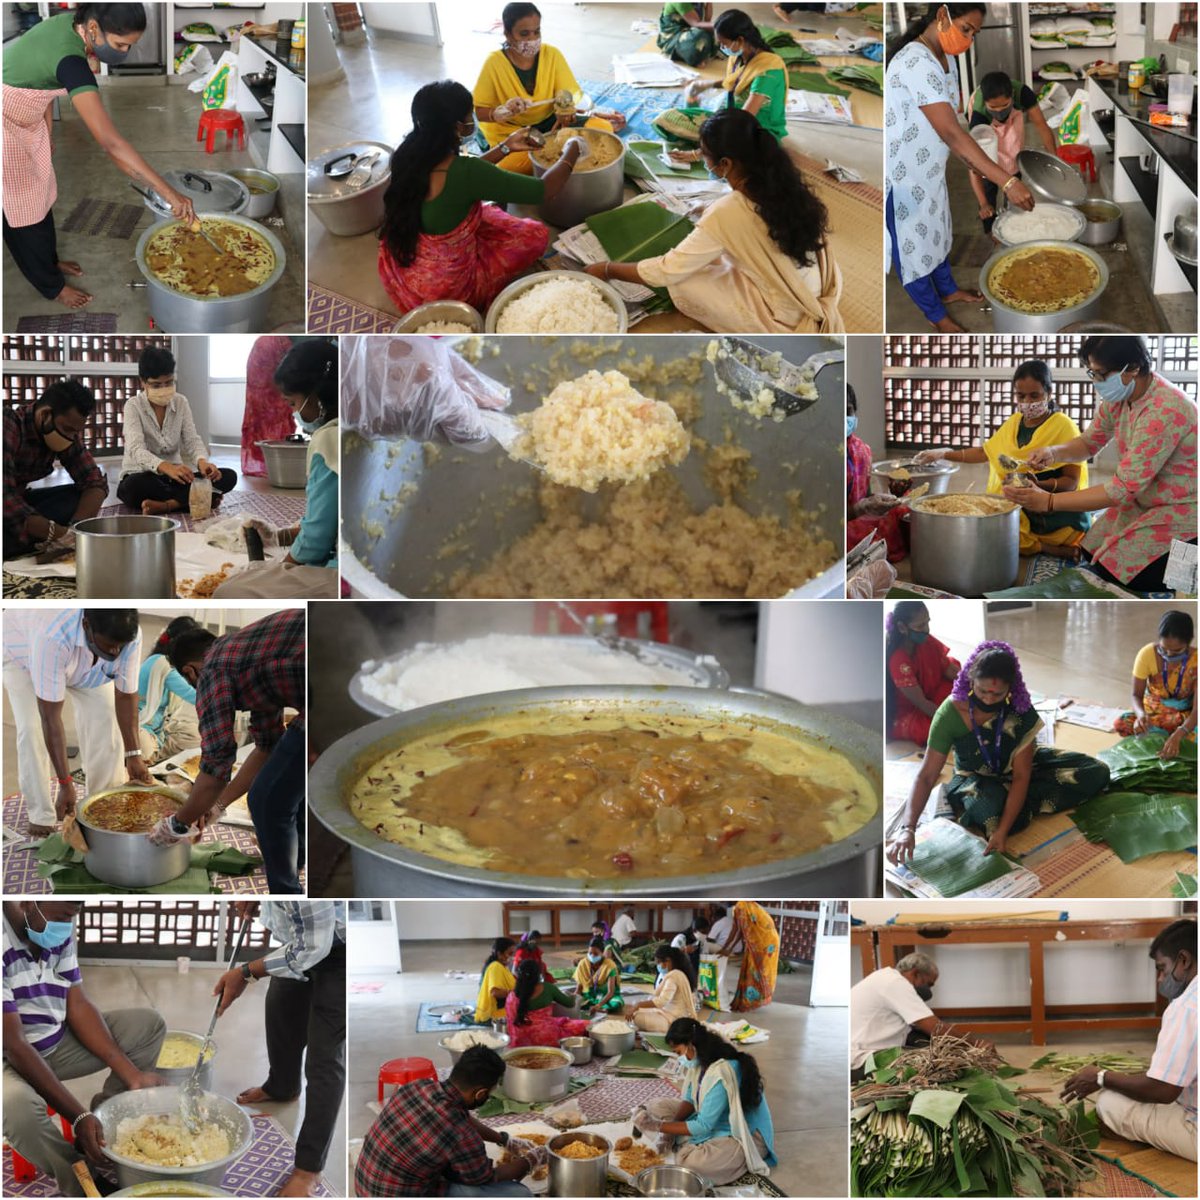 750 Sakkara Pongal (Sweet Pongal) and Sambar Rice packets distributed this morning. 
Tremendous teamwork since 7 am to be able to make this happen! 
Advance Pongal wishes from Team Sharana! 

#team #support #community #Pongal2021 #Pongal #Pongalcelebrations #sharingiscaring #NGO